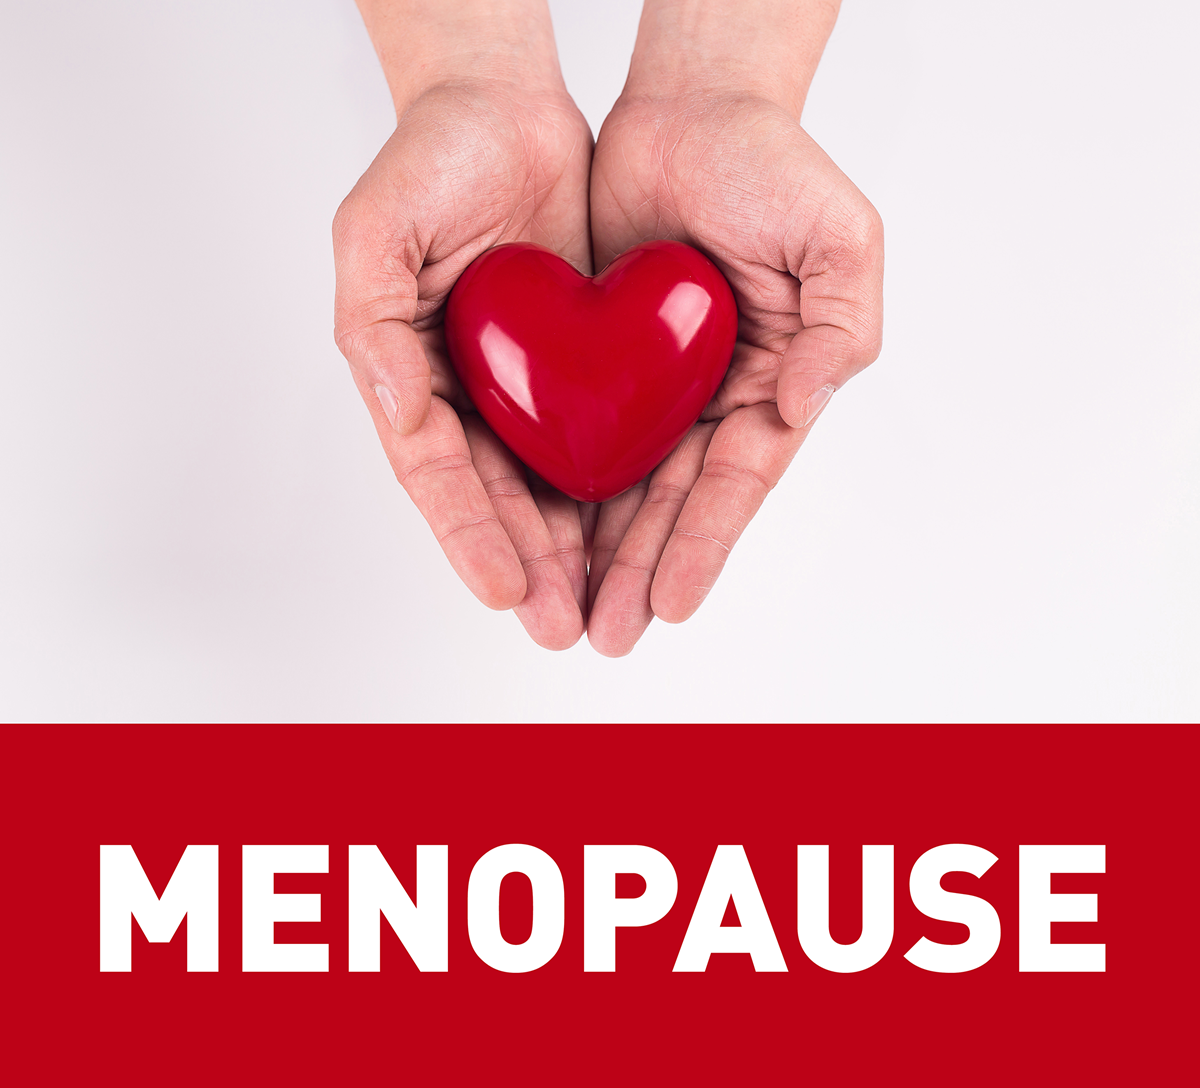 Are we the only species that experiences menopause?